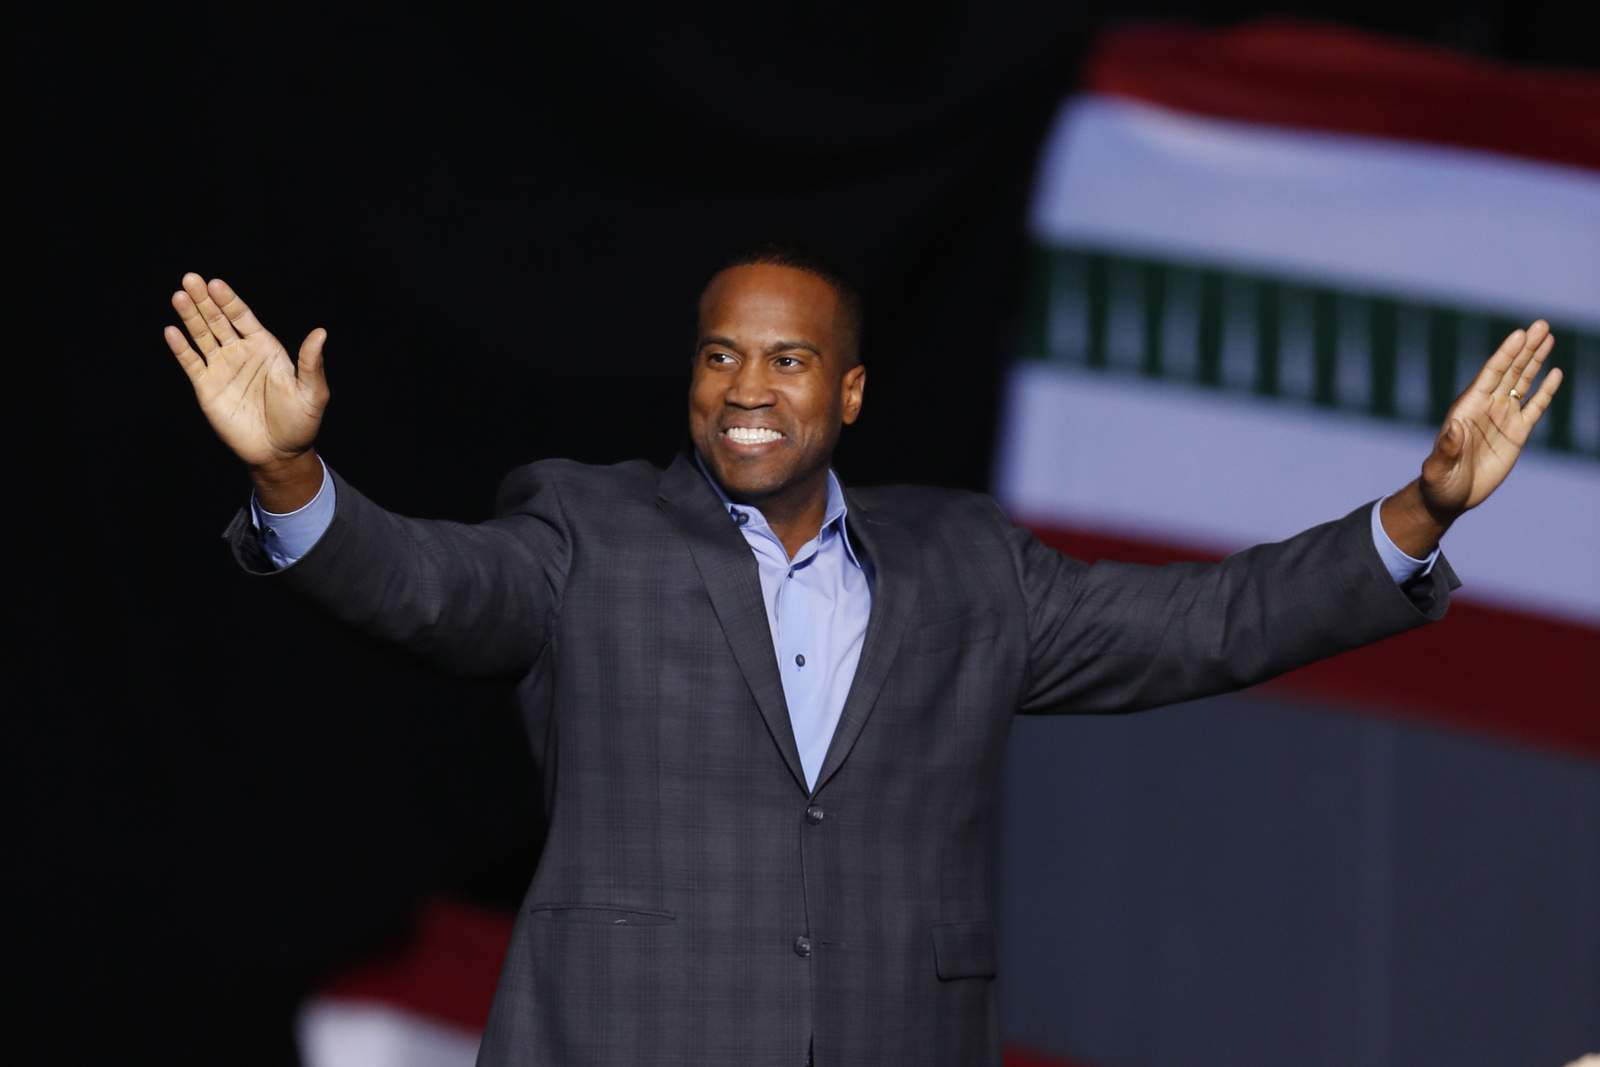 GOP rising star John James faces trouble at top of ticket